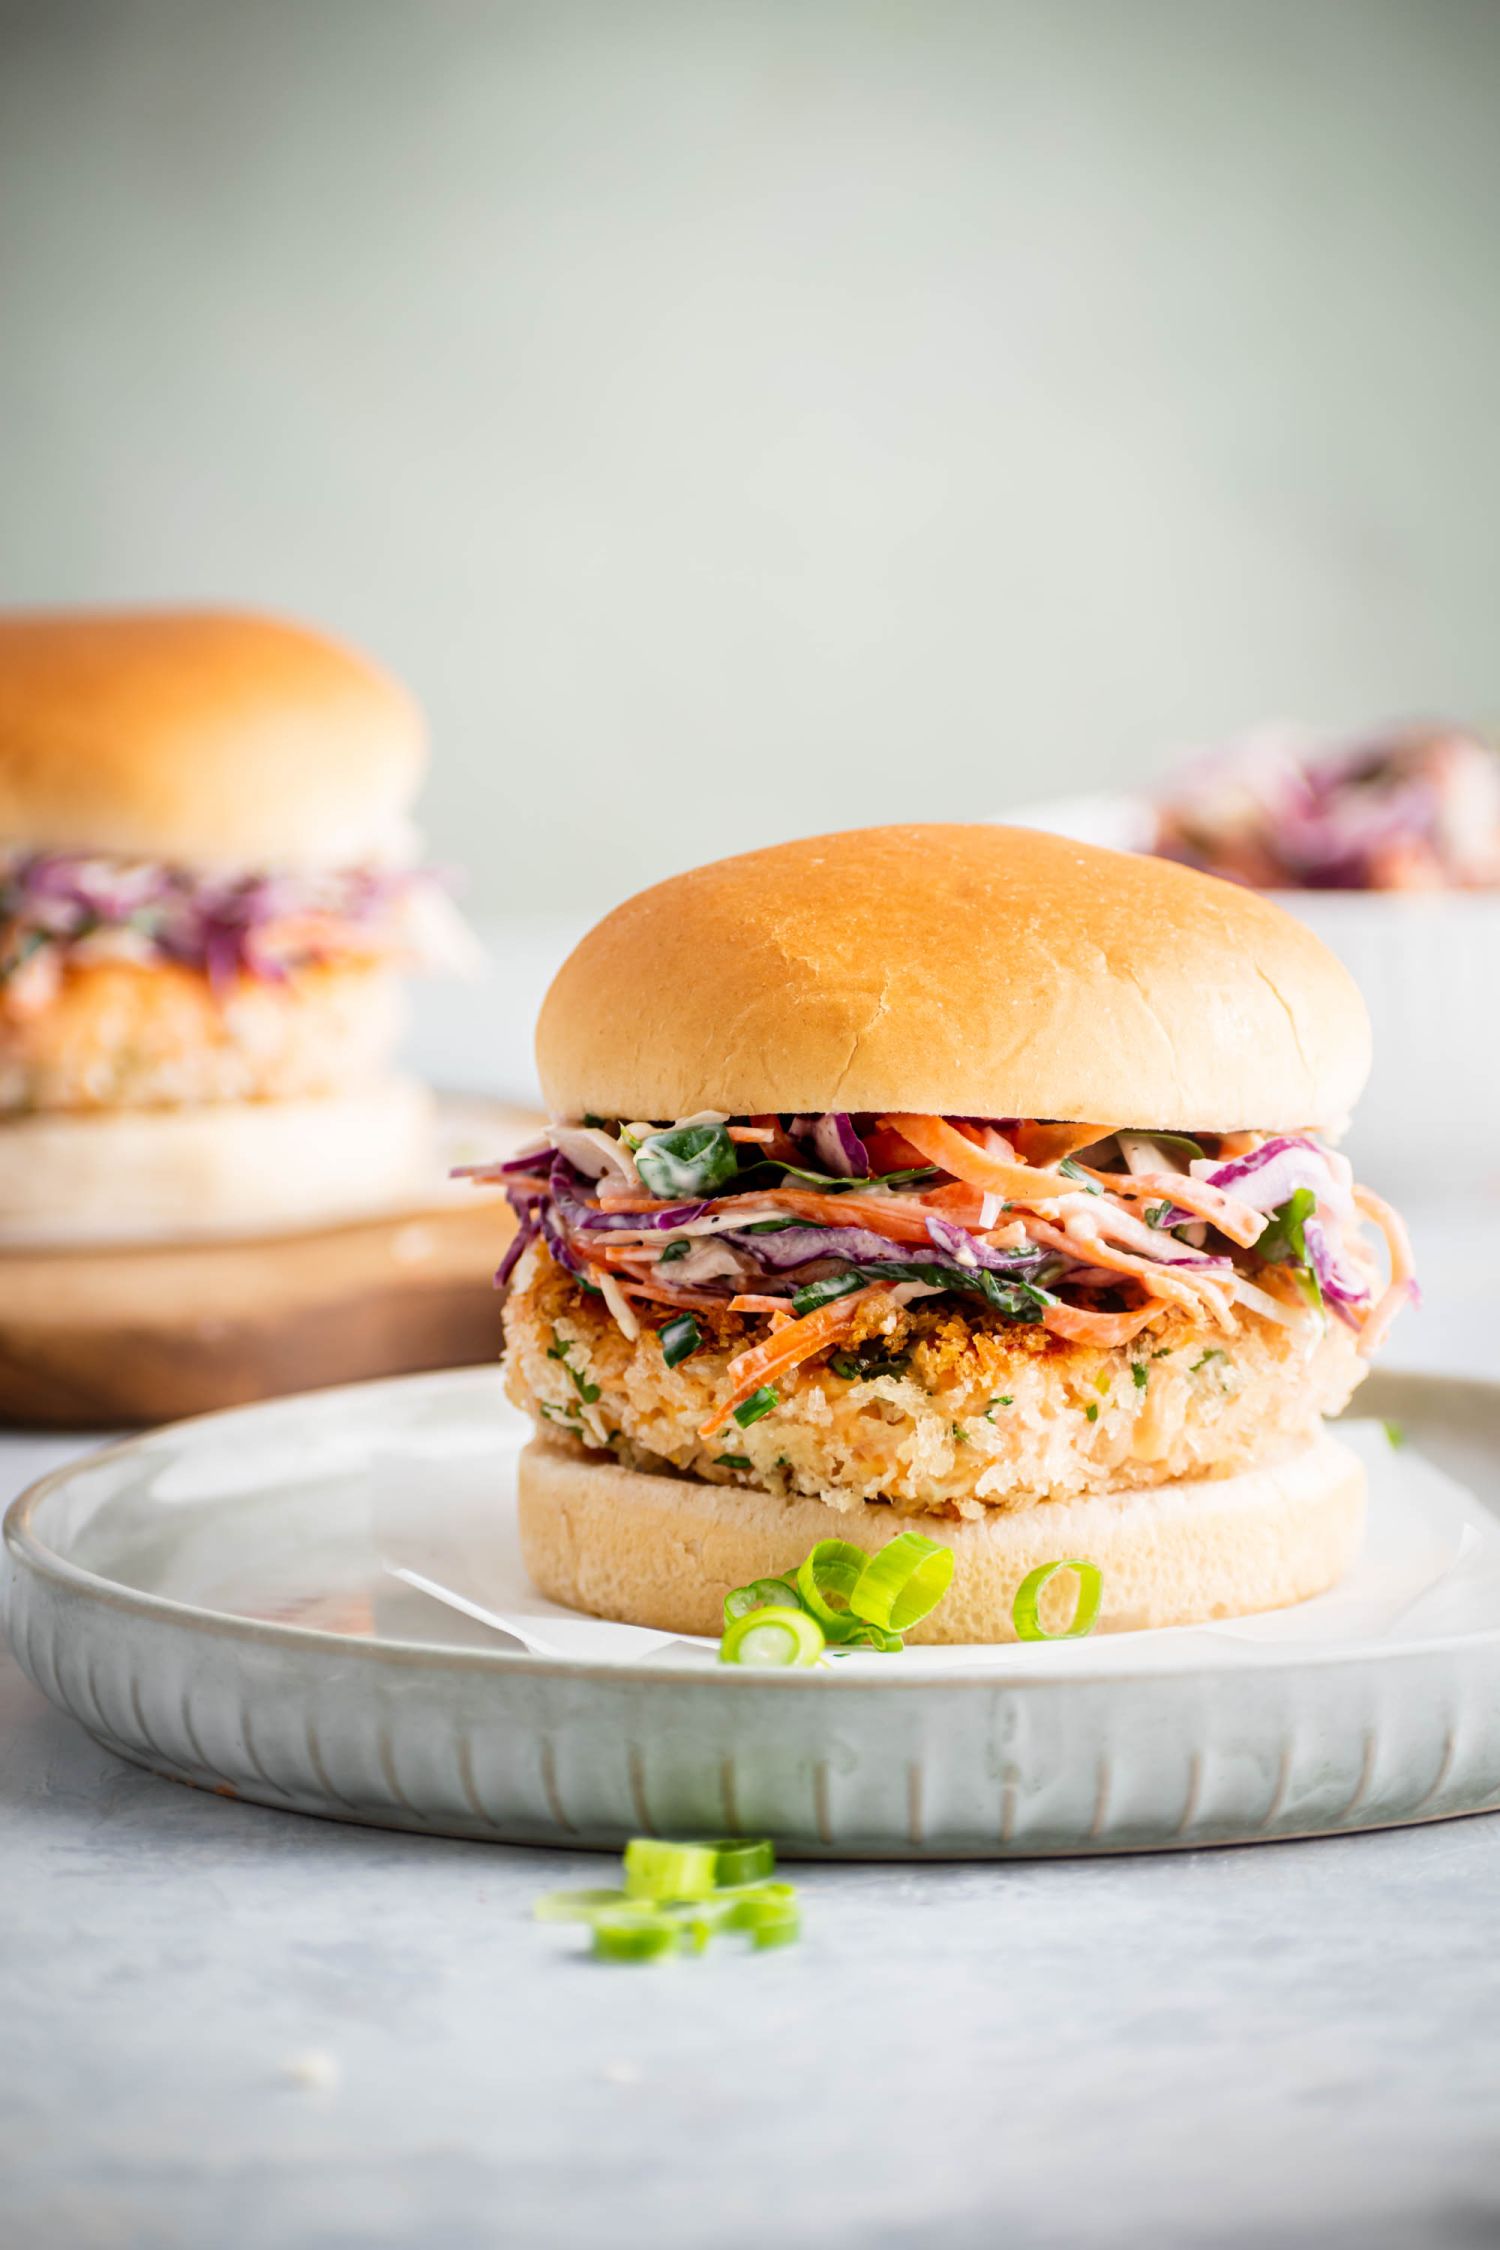 Homemade salmon burger patties served with tricolor coleslaw and green onions on a roll.